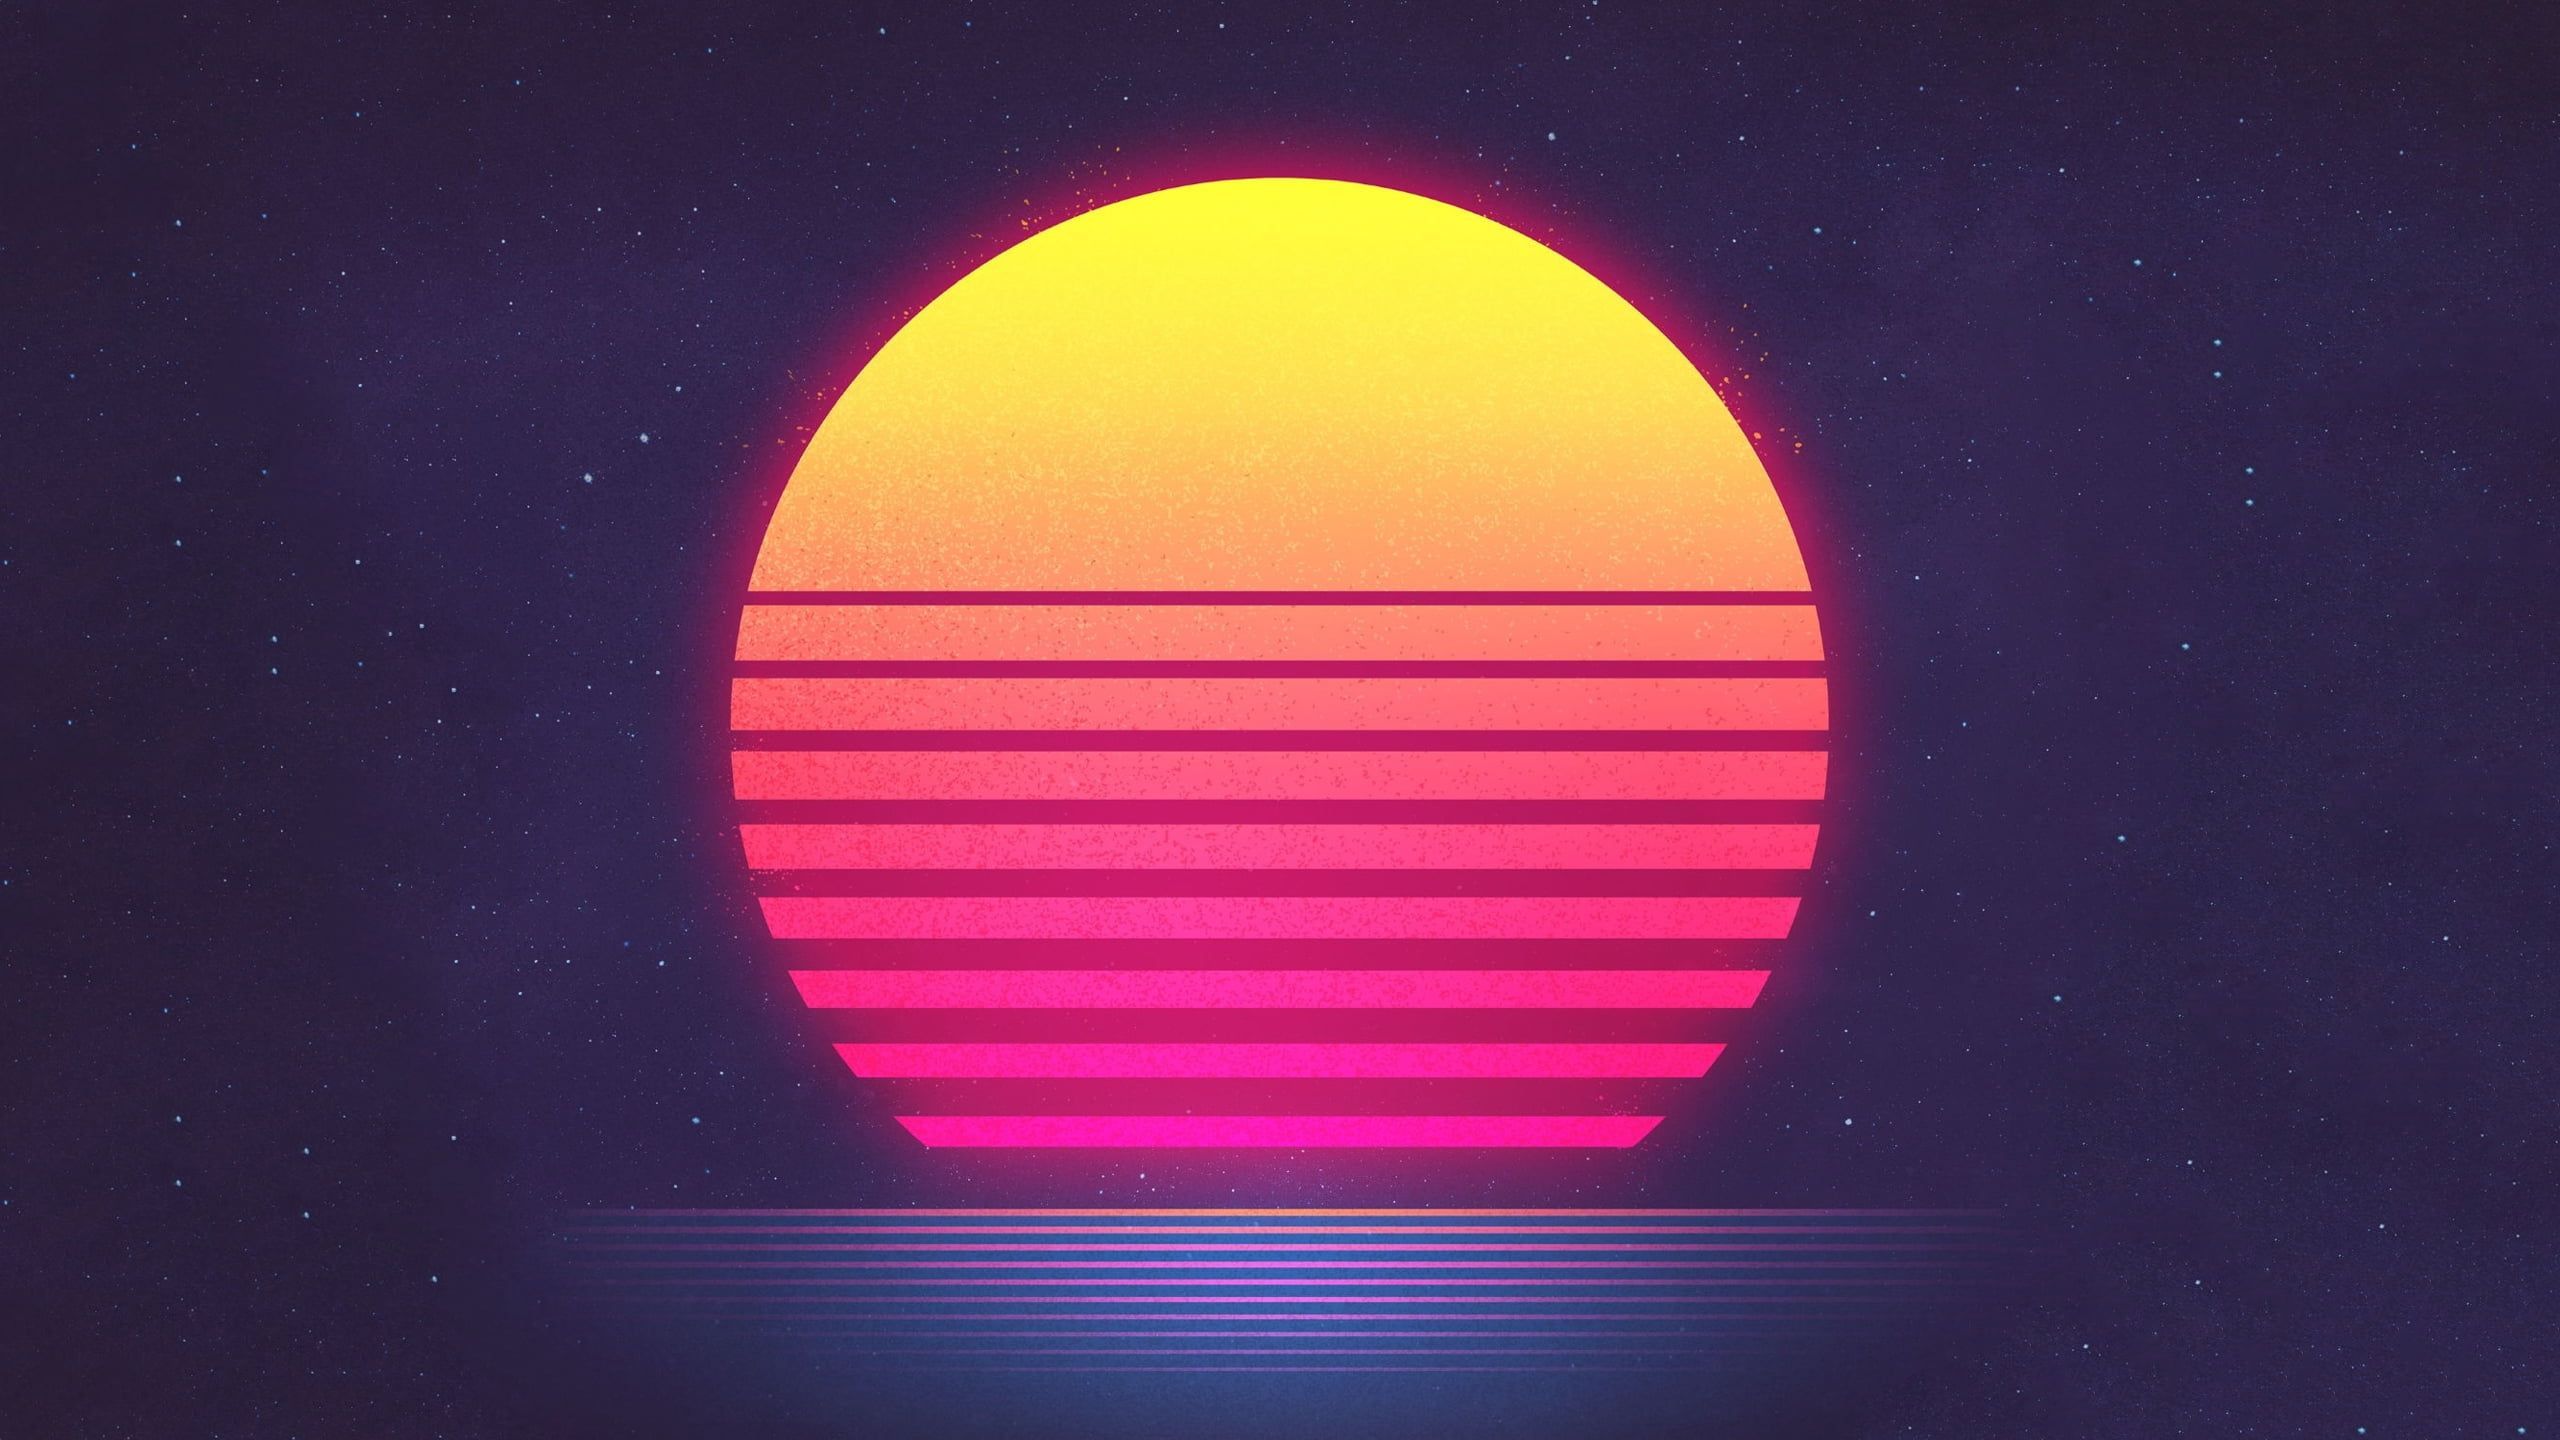 red and yellow sun illustration, orange and red sun with stripes illustration New Retro Wave #synthwave James White #FM-. Retro waves, Synthwave, Sun illustration